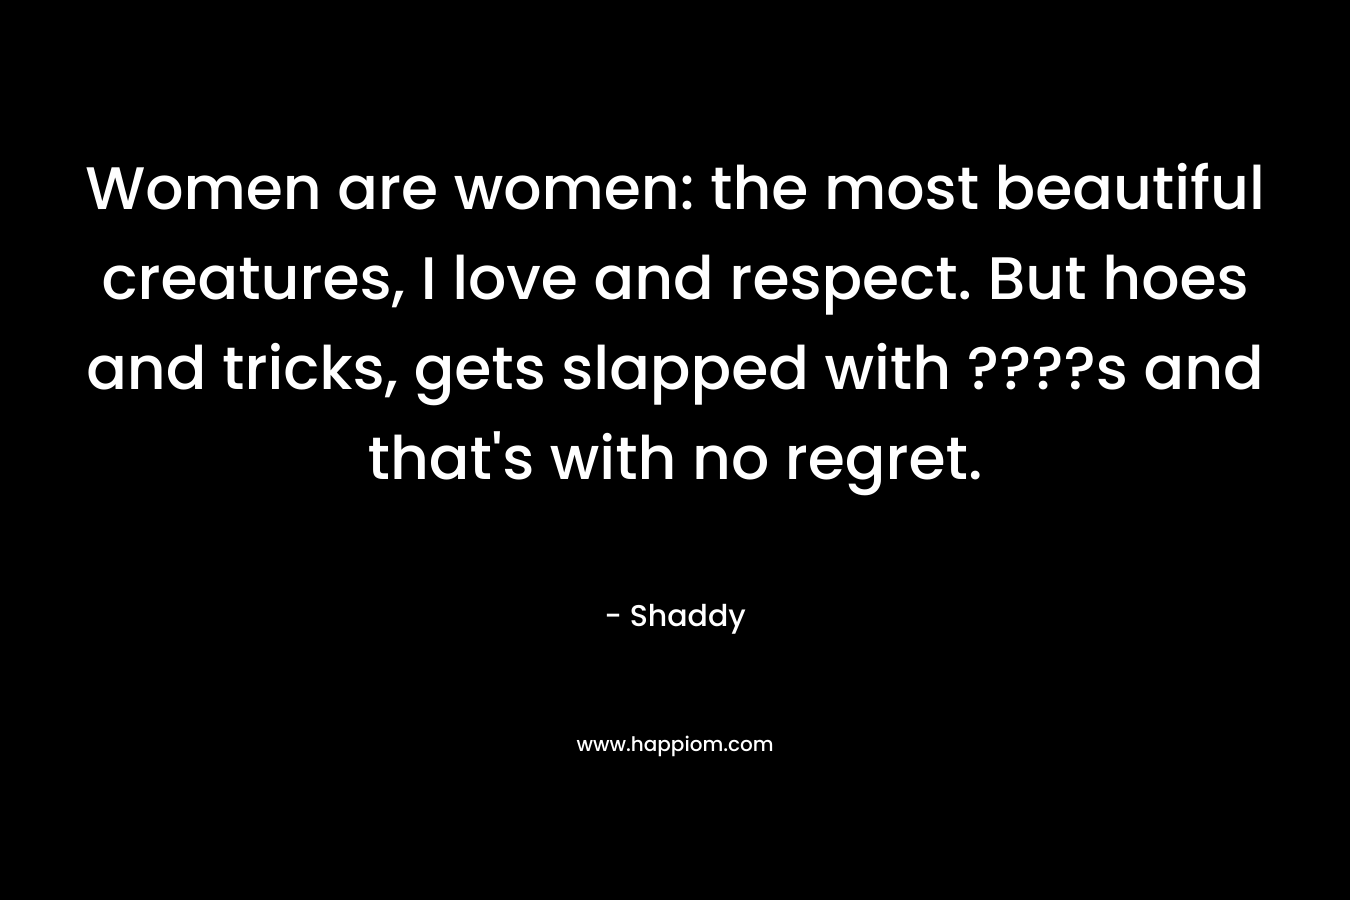 Women are women: the most beautiful creatures, I love and respect. But hoes and tricks, gets slapped with ????s and that's with no regret.